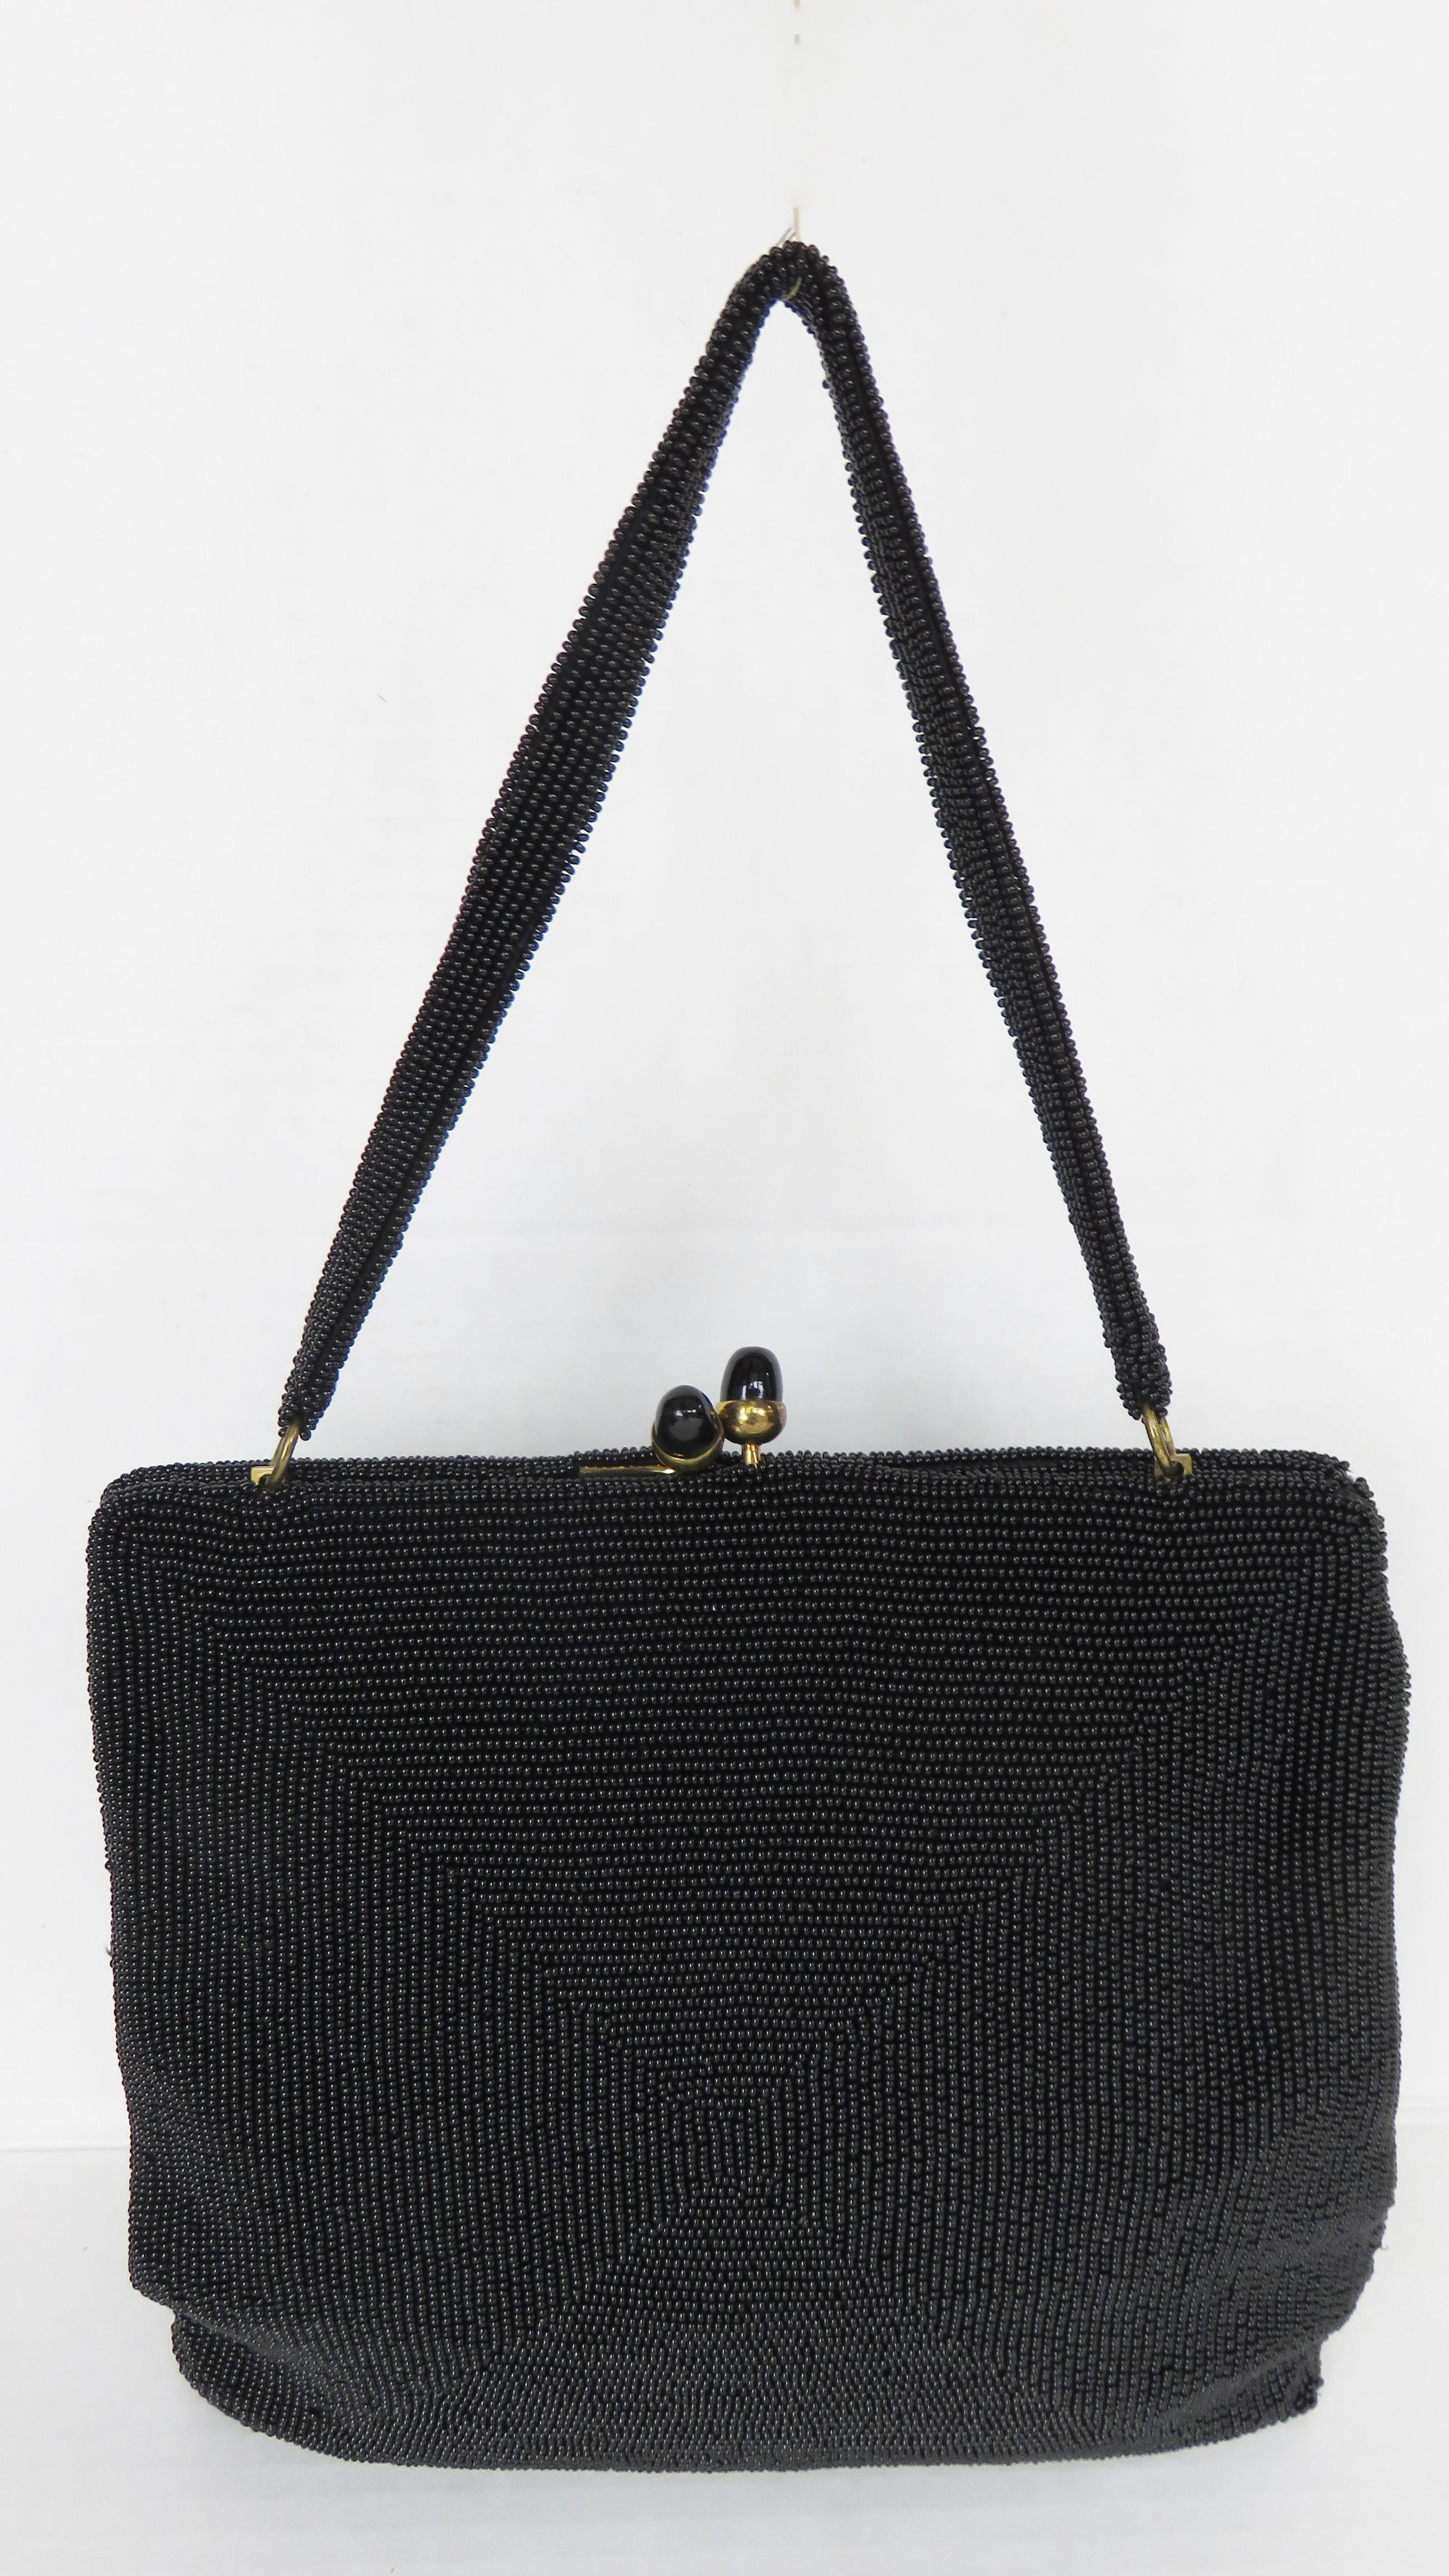 A beautiful fine black glass beaded by Delill in and intracate square pattern. It has a top handle, top black glass button closure and is silk lined with an inner pocket.

Height  8